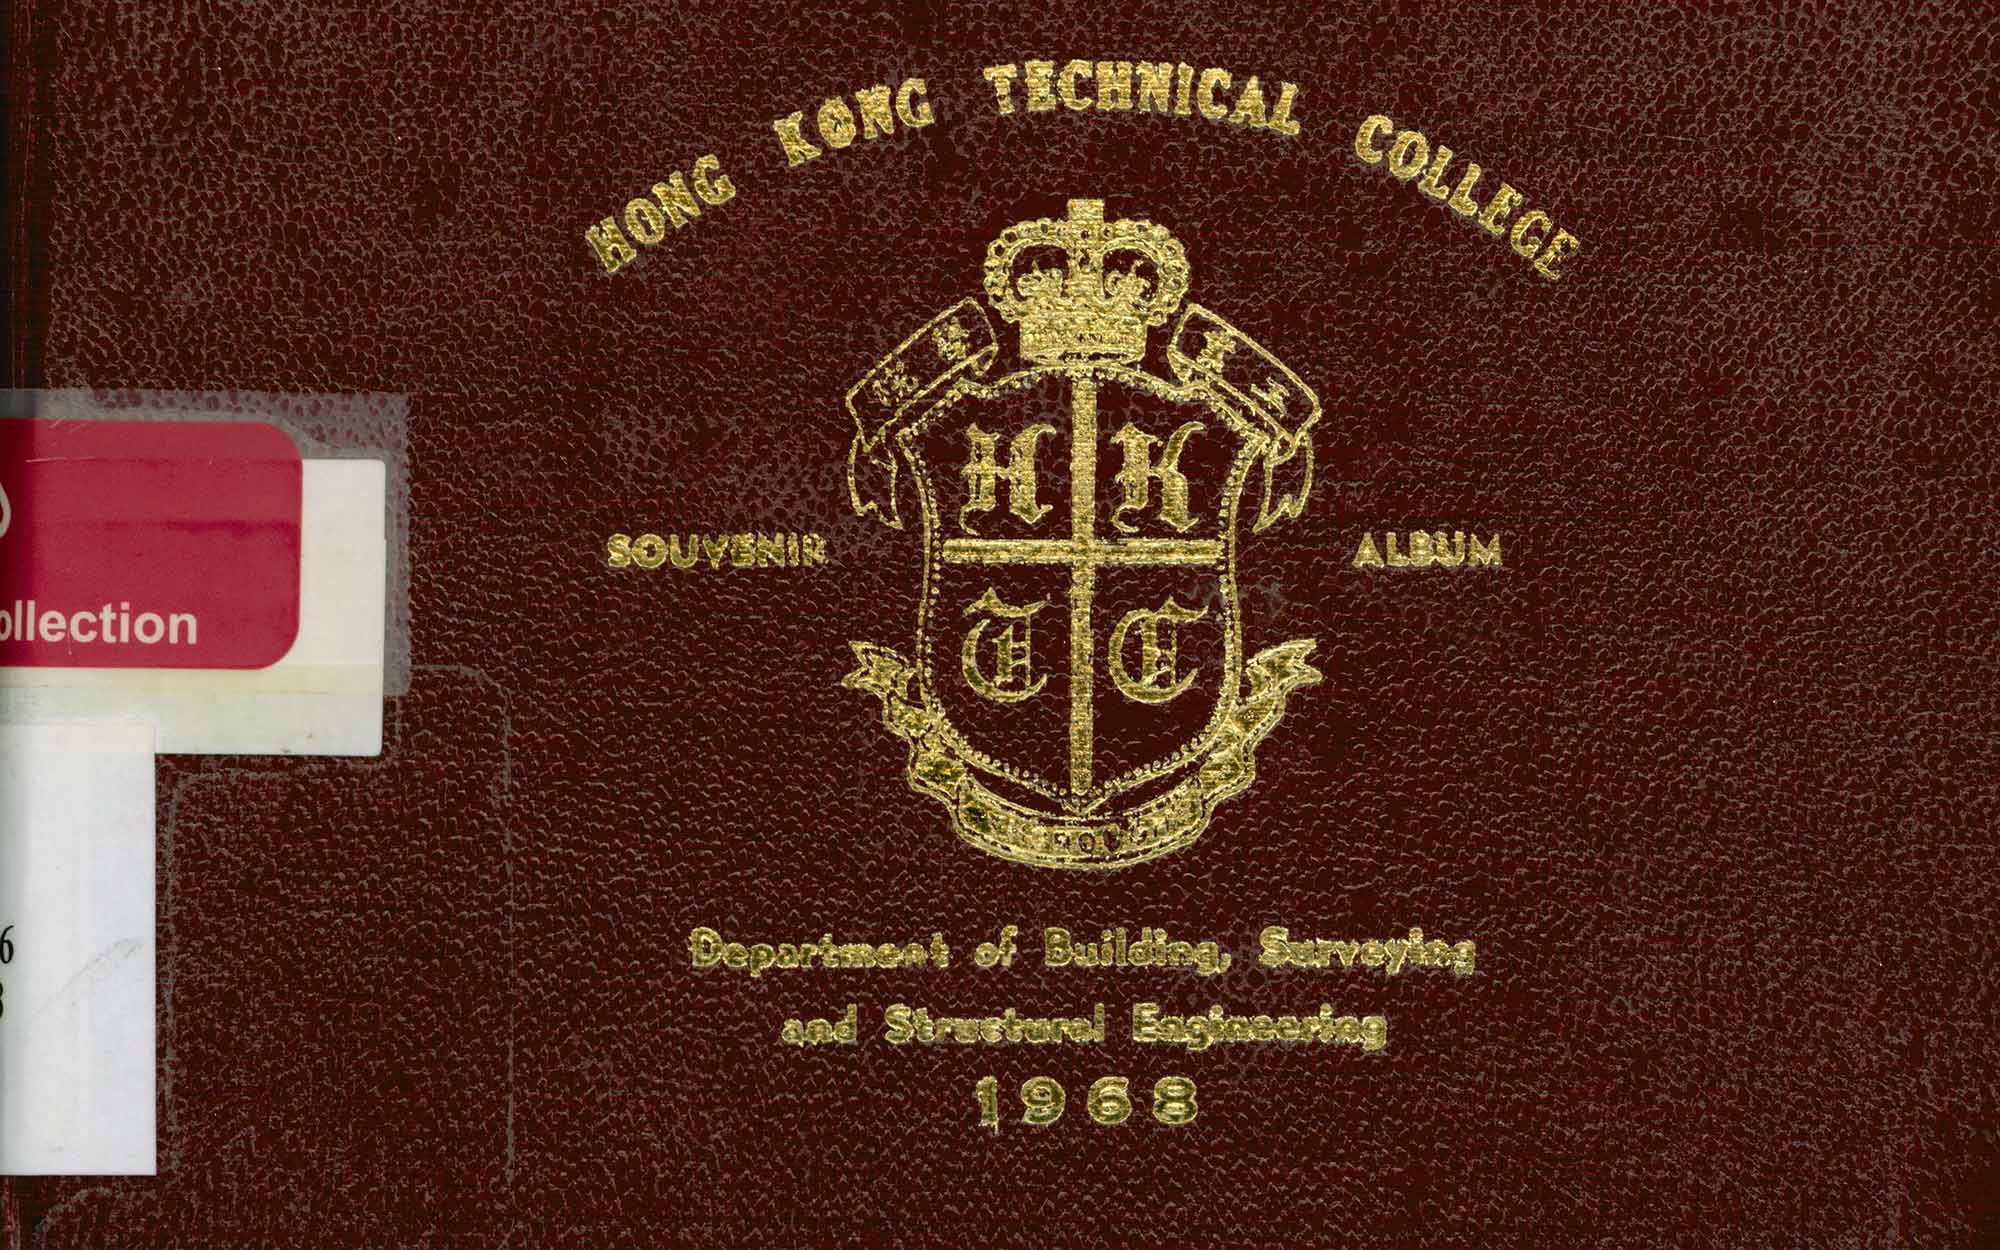 Hong Kong Technical College. Department of Building, Surveying and Structural Engineering. Souvenir album: 1968